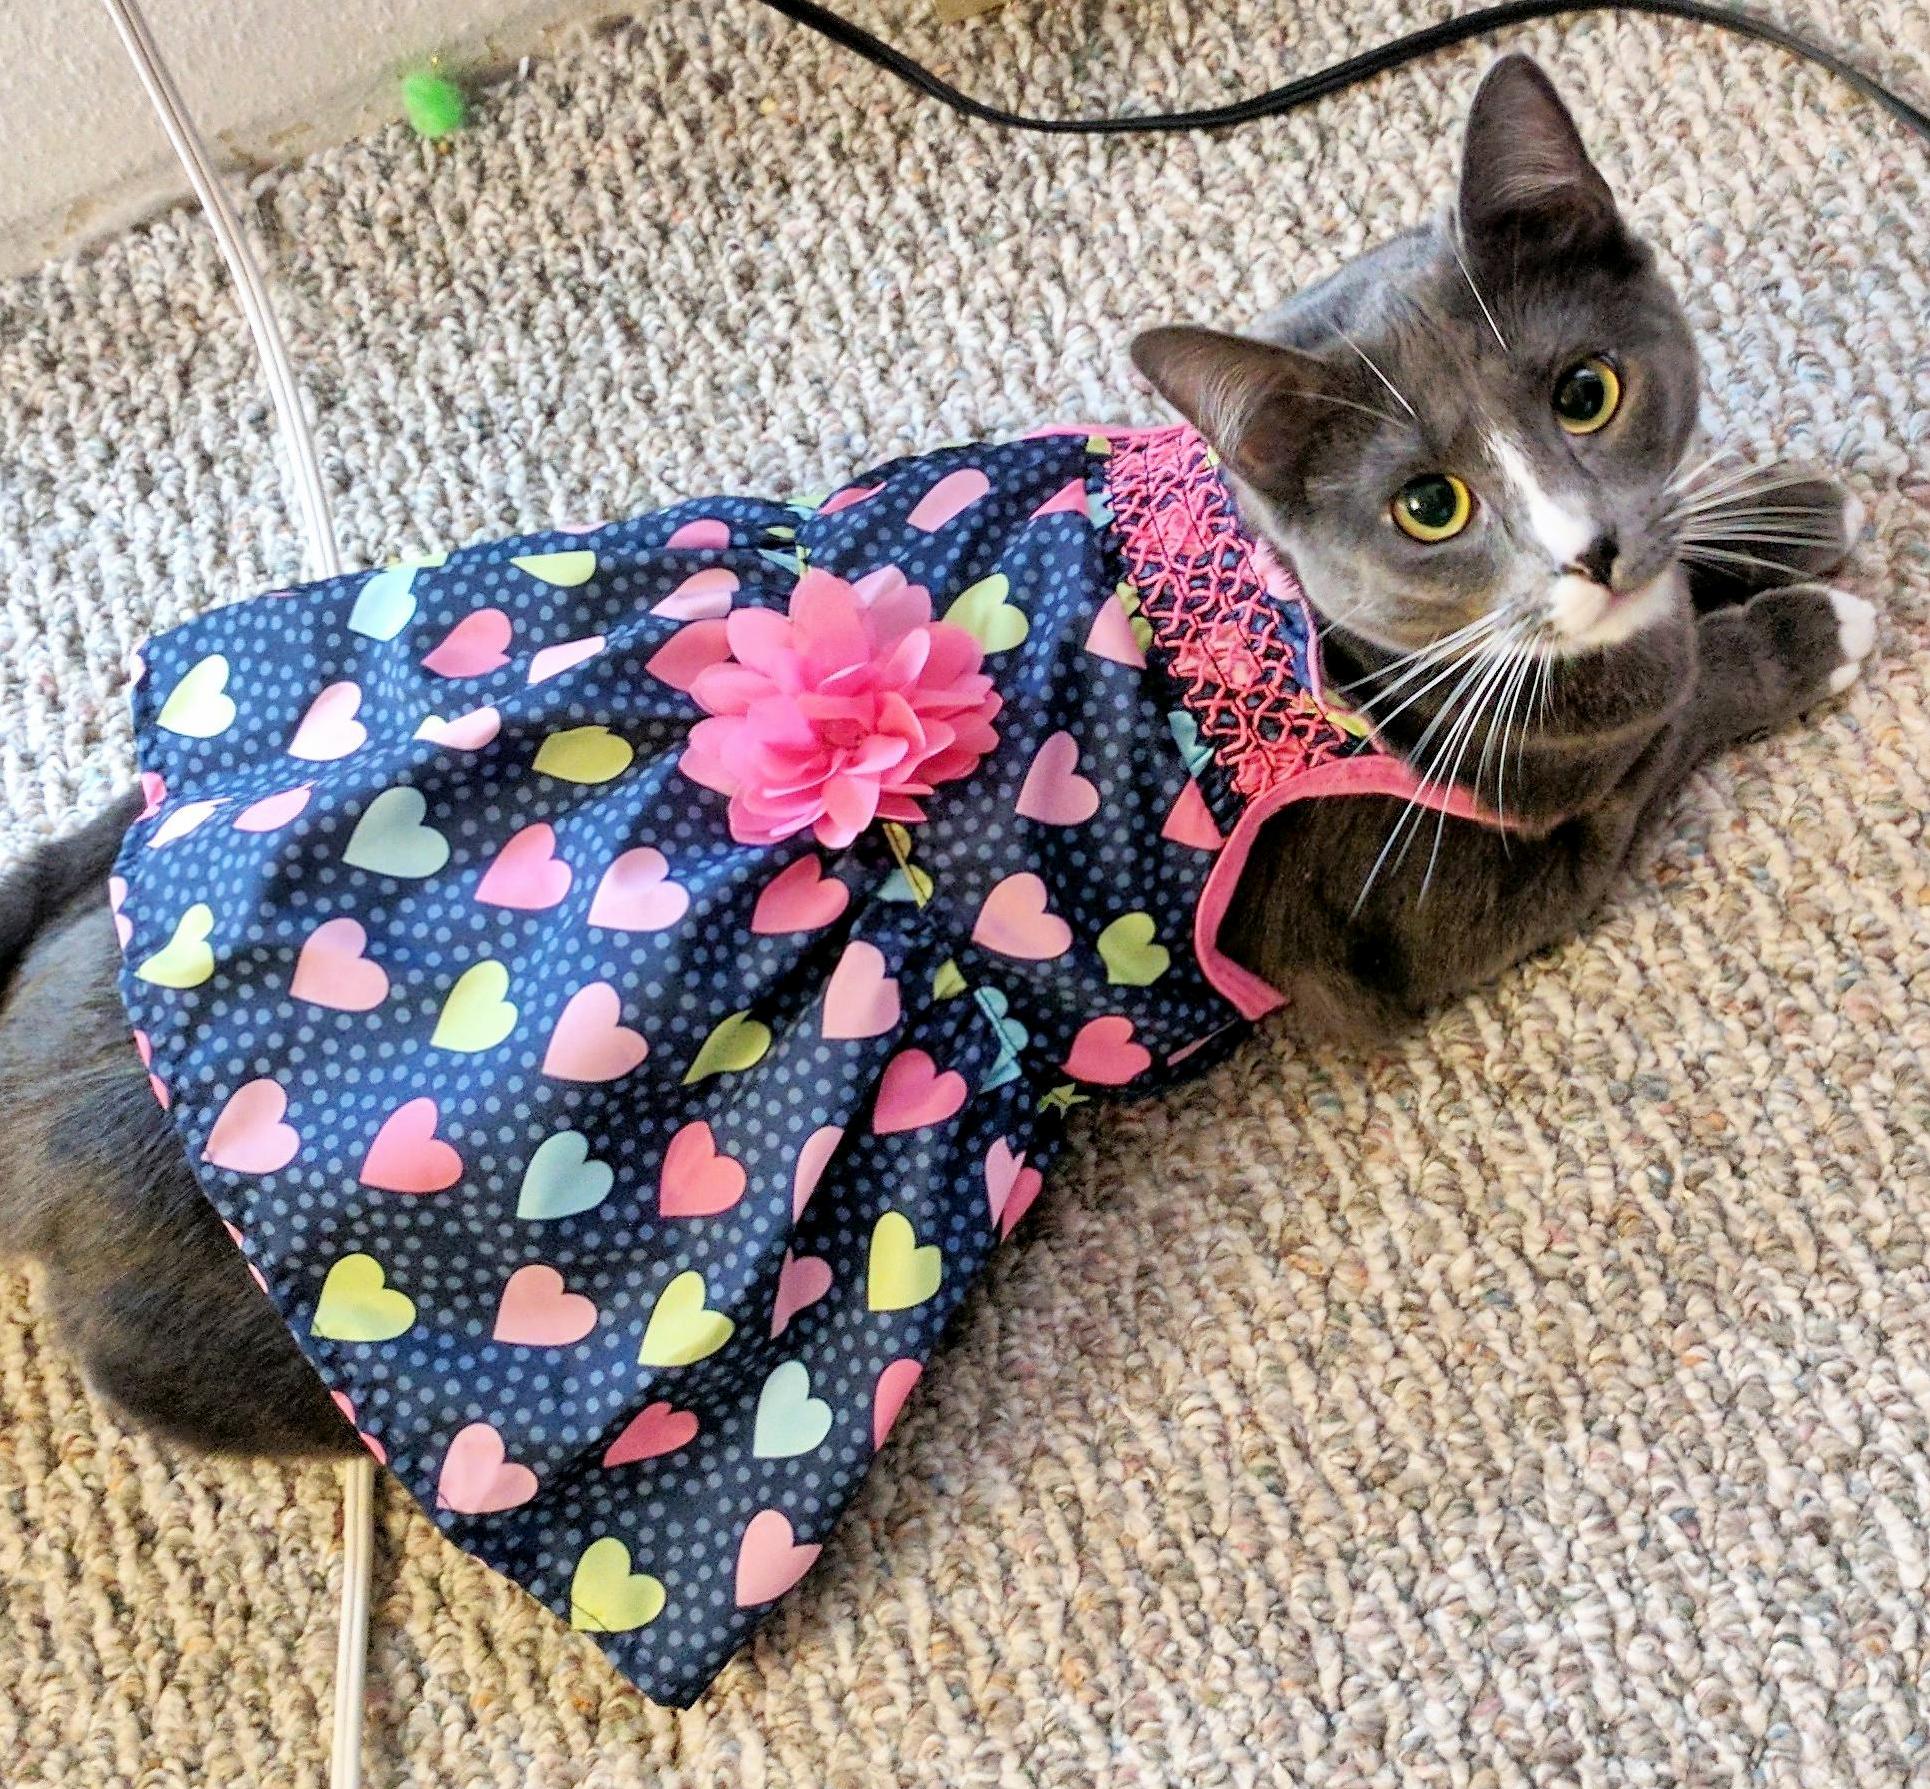 Meet maisy. she wanted everyone to see her new dress